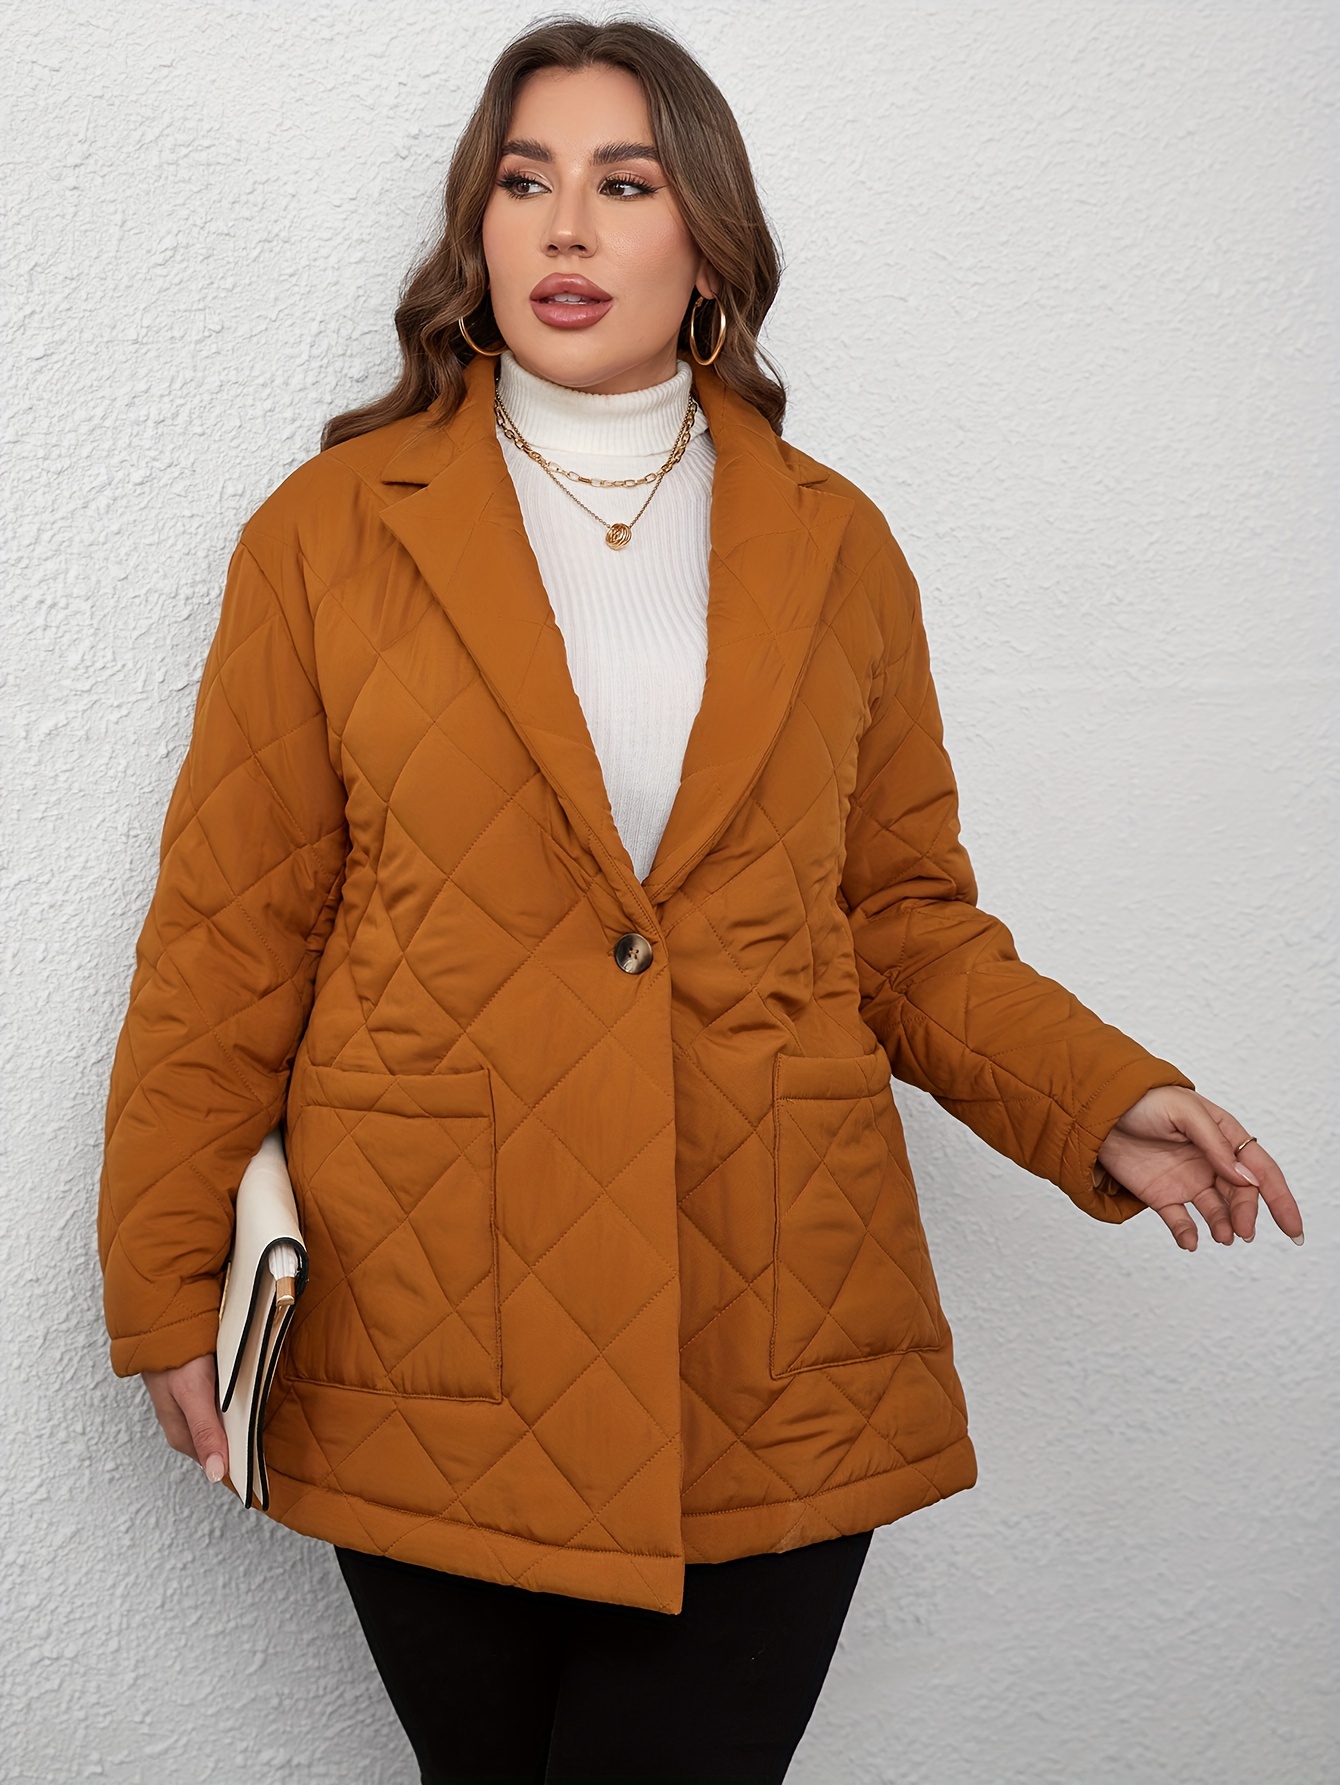 Plus Size Casual Coat, Women's Plus Solid Quilted Button Up Long